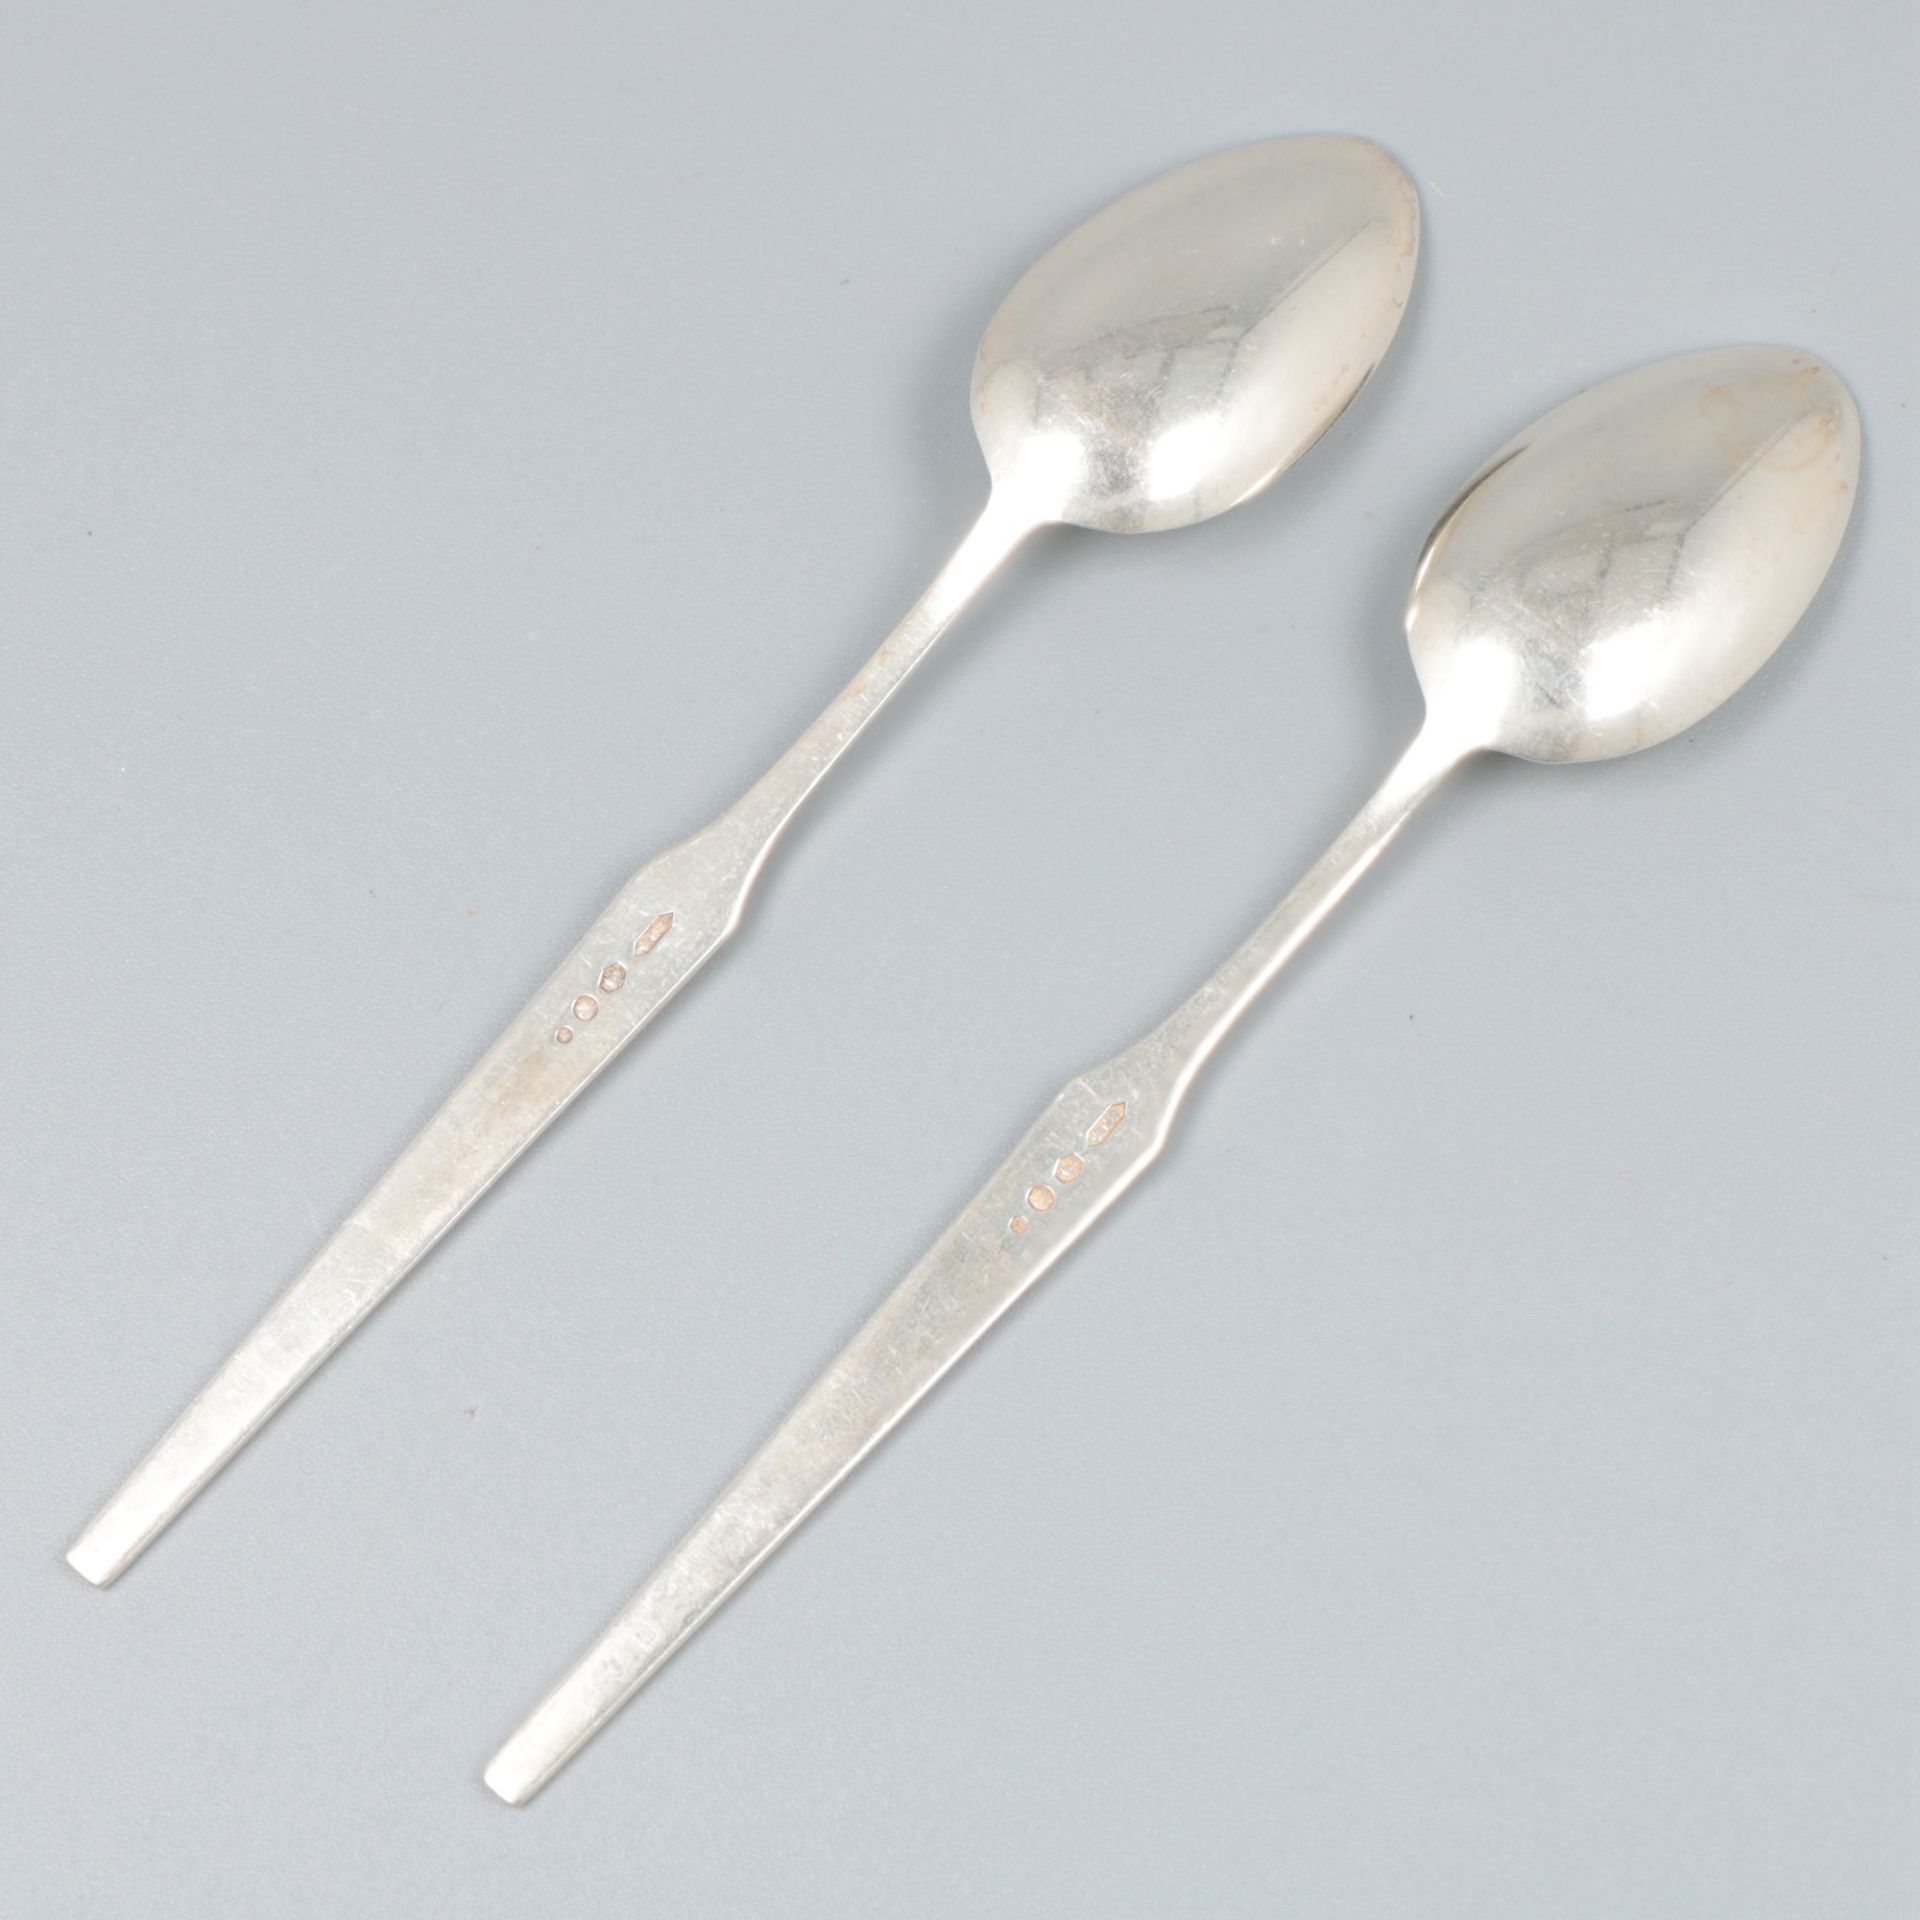 12-piece set of coffee spoons silver. - Image 5 of 6